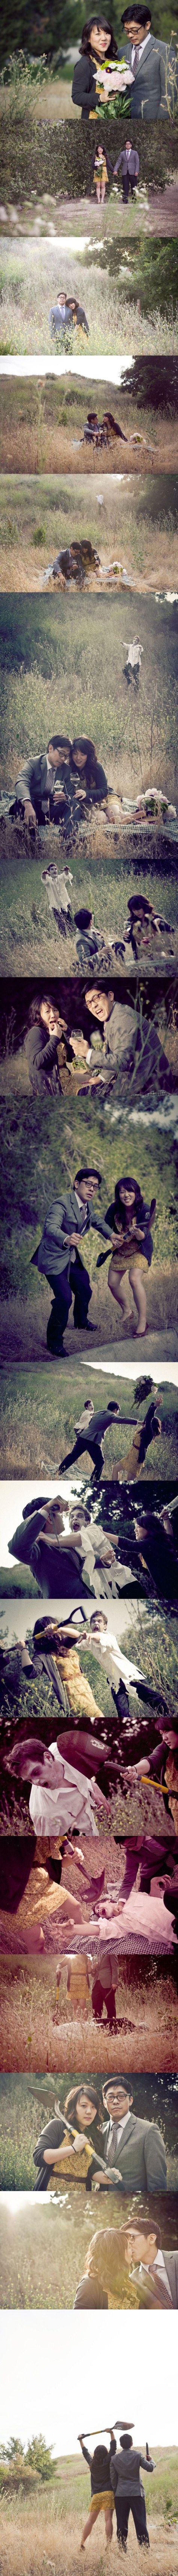 Best Engagement Photo Ever (bests of pinterest gallery)